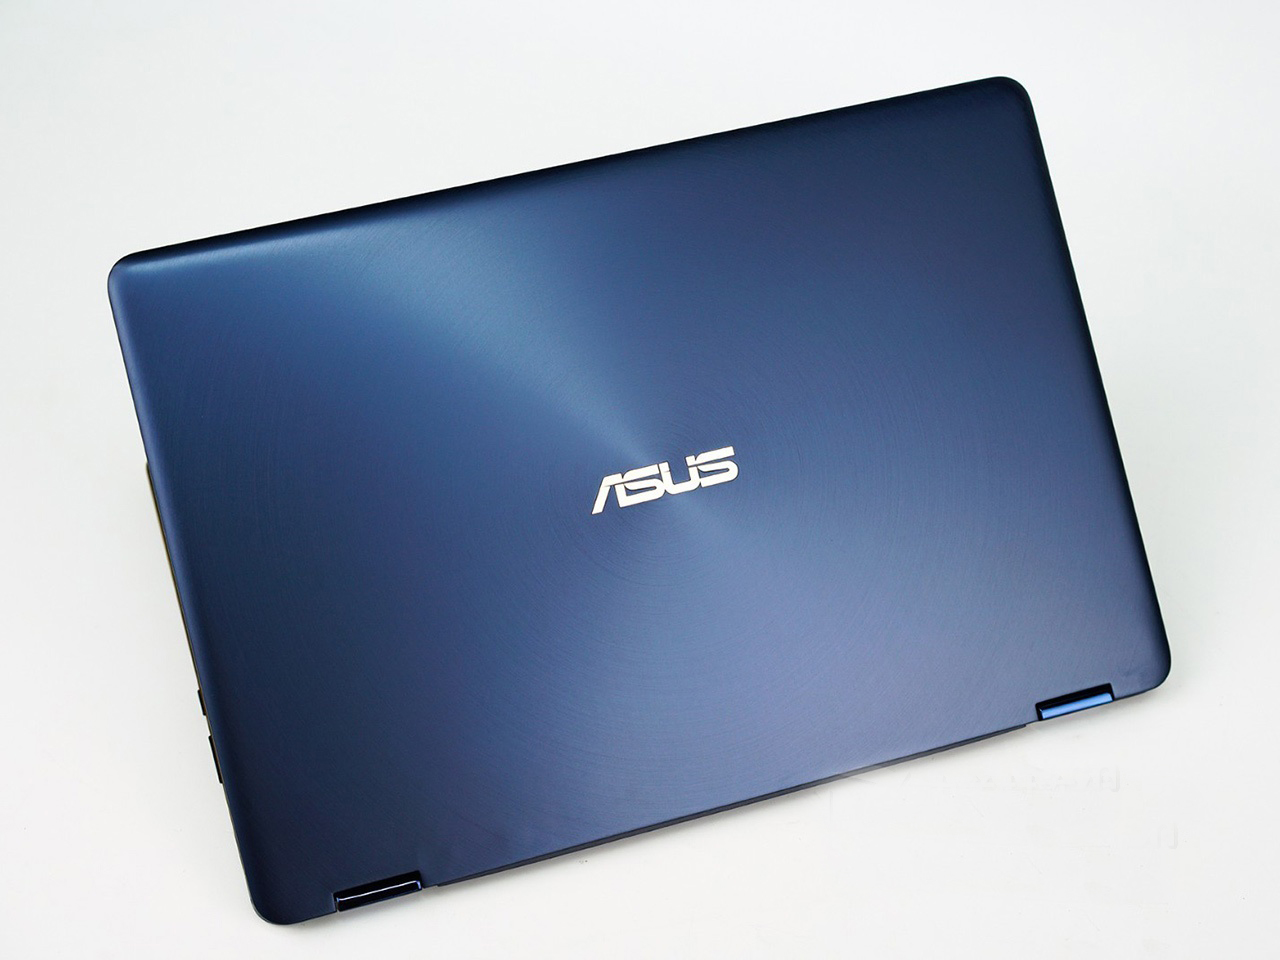  Which key to press to reinstall the ASUS laptop system